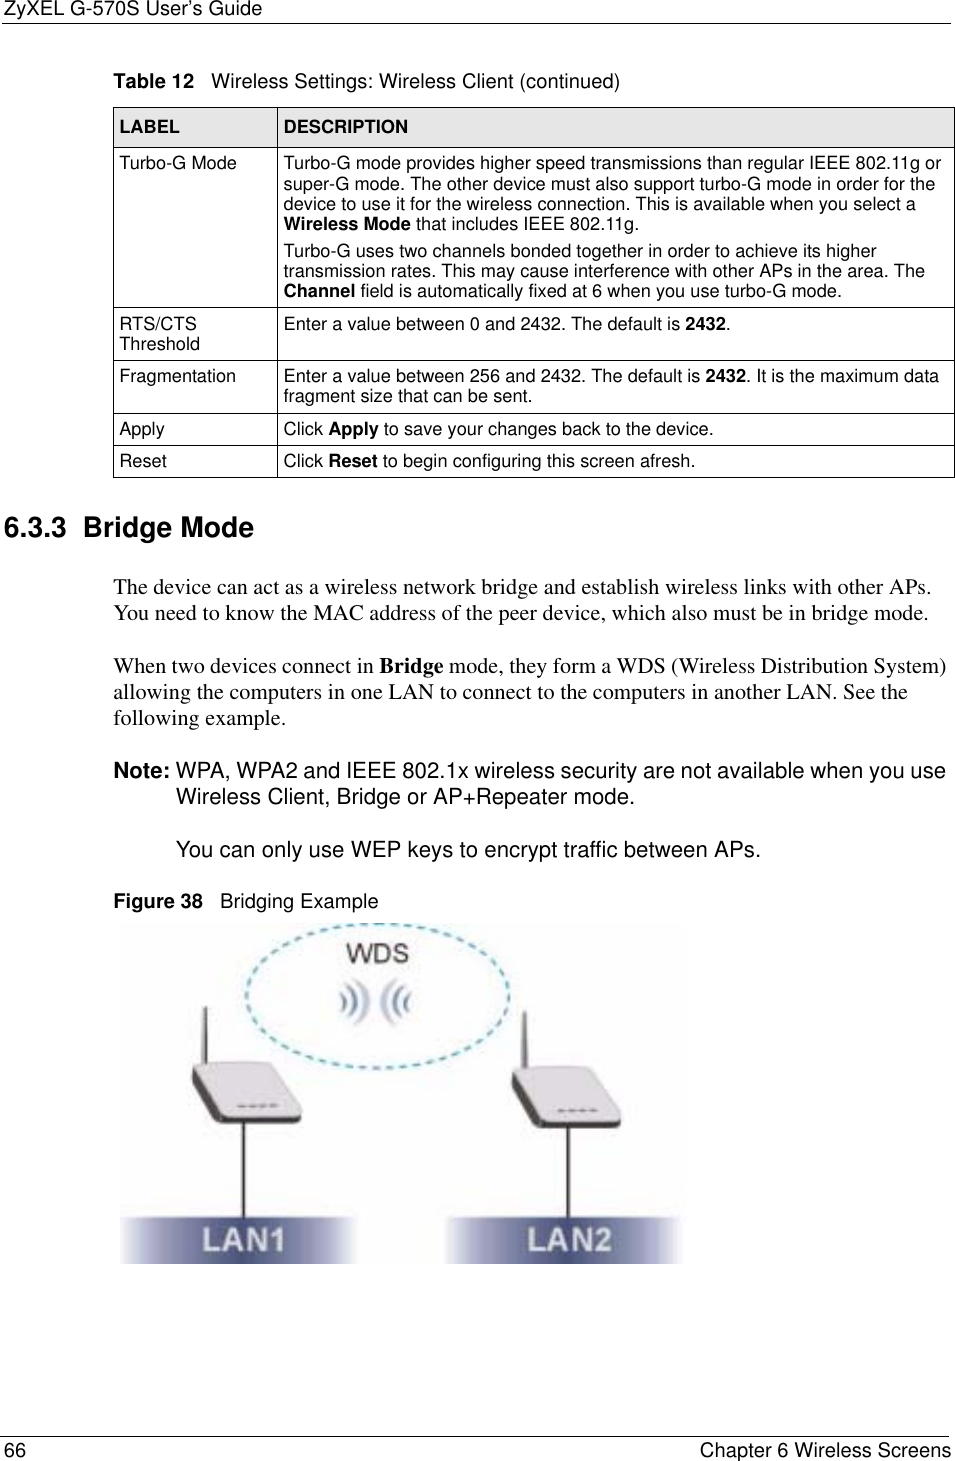 ZyXEL G-570S User’s Guide66 Chapter 6 Wireless Screens6.3.3  Bridge Mode The device can act as a wireless network bridge and establish wireless links with other APs. You need to know the MAC address of the peer device, which also must be in bridge mode. When two devices connect in Bridge mode, they form a WDS (Wireless Distribution System) allowing the computers in one LAN to connect to the computers in another LAN. See the following example.Note: WPA, WPA2 and IEEE 802.1x wireless security are not available when you use Wireless Client, Bridge or AP+Repeater mode. You can only use WEP keys to encrypt traffic between APs.Figure 38   Bridging ExampleTurbo-G Mode Turbo-G mode provides higher speed transmissions than regular IEEE 802.11g or super-G mode. The other device must also support turbo-G mode in order for the device to use it for the wireless connection. This is available when you select a Wireless Mode that includes IEEE 802.11g.Turbo-G uses two channels bonded together in order to achieve its higher transmission rates. This may cause interference with other APs in the area. The Channel field is automatically fixed at 6 when you use turbo-G mode. RTS/CTS Threshold Enter a value between 0 and 2432. The default is 2432.Fragmentation  Enter a value between 256 and 2432. The default is 2432. It is the maximum data fragment size that can be sent.Apply Click Apply to save your changes back to the device.Reset Click Reset to begin configuring this screen afresh.Table 12   Wireless Settings: Wireless Client (continued)LABEL DESCRIPTION